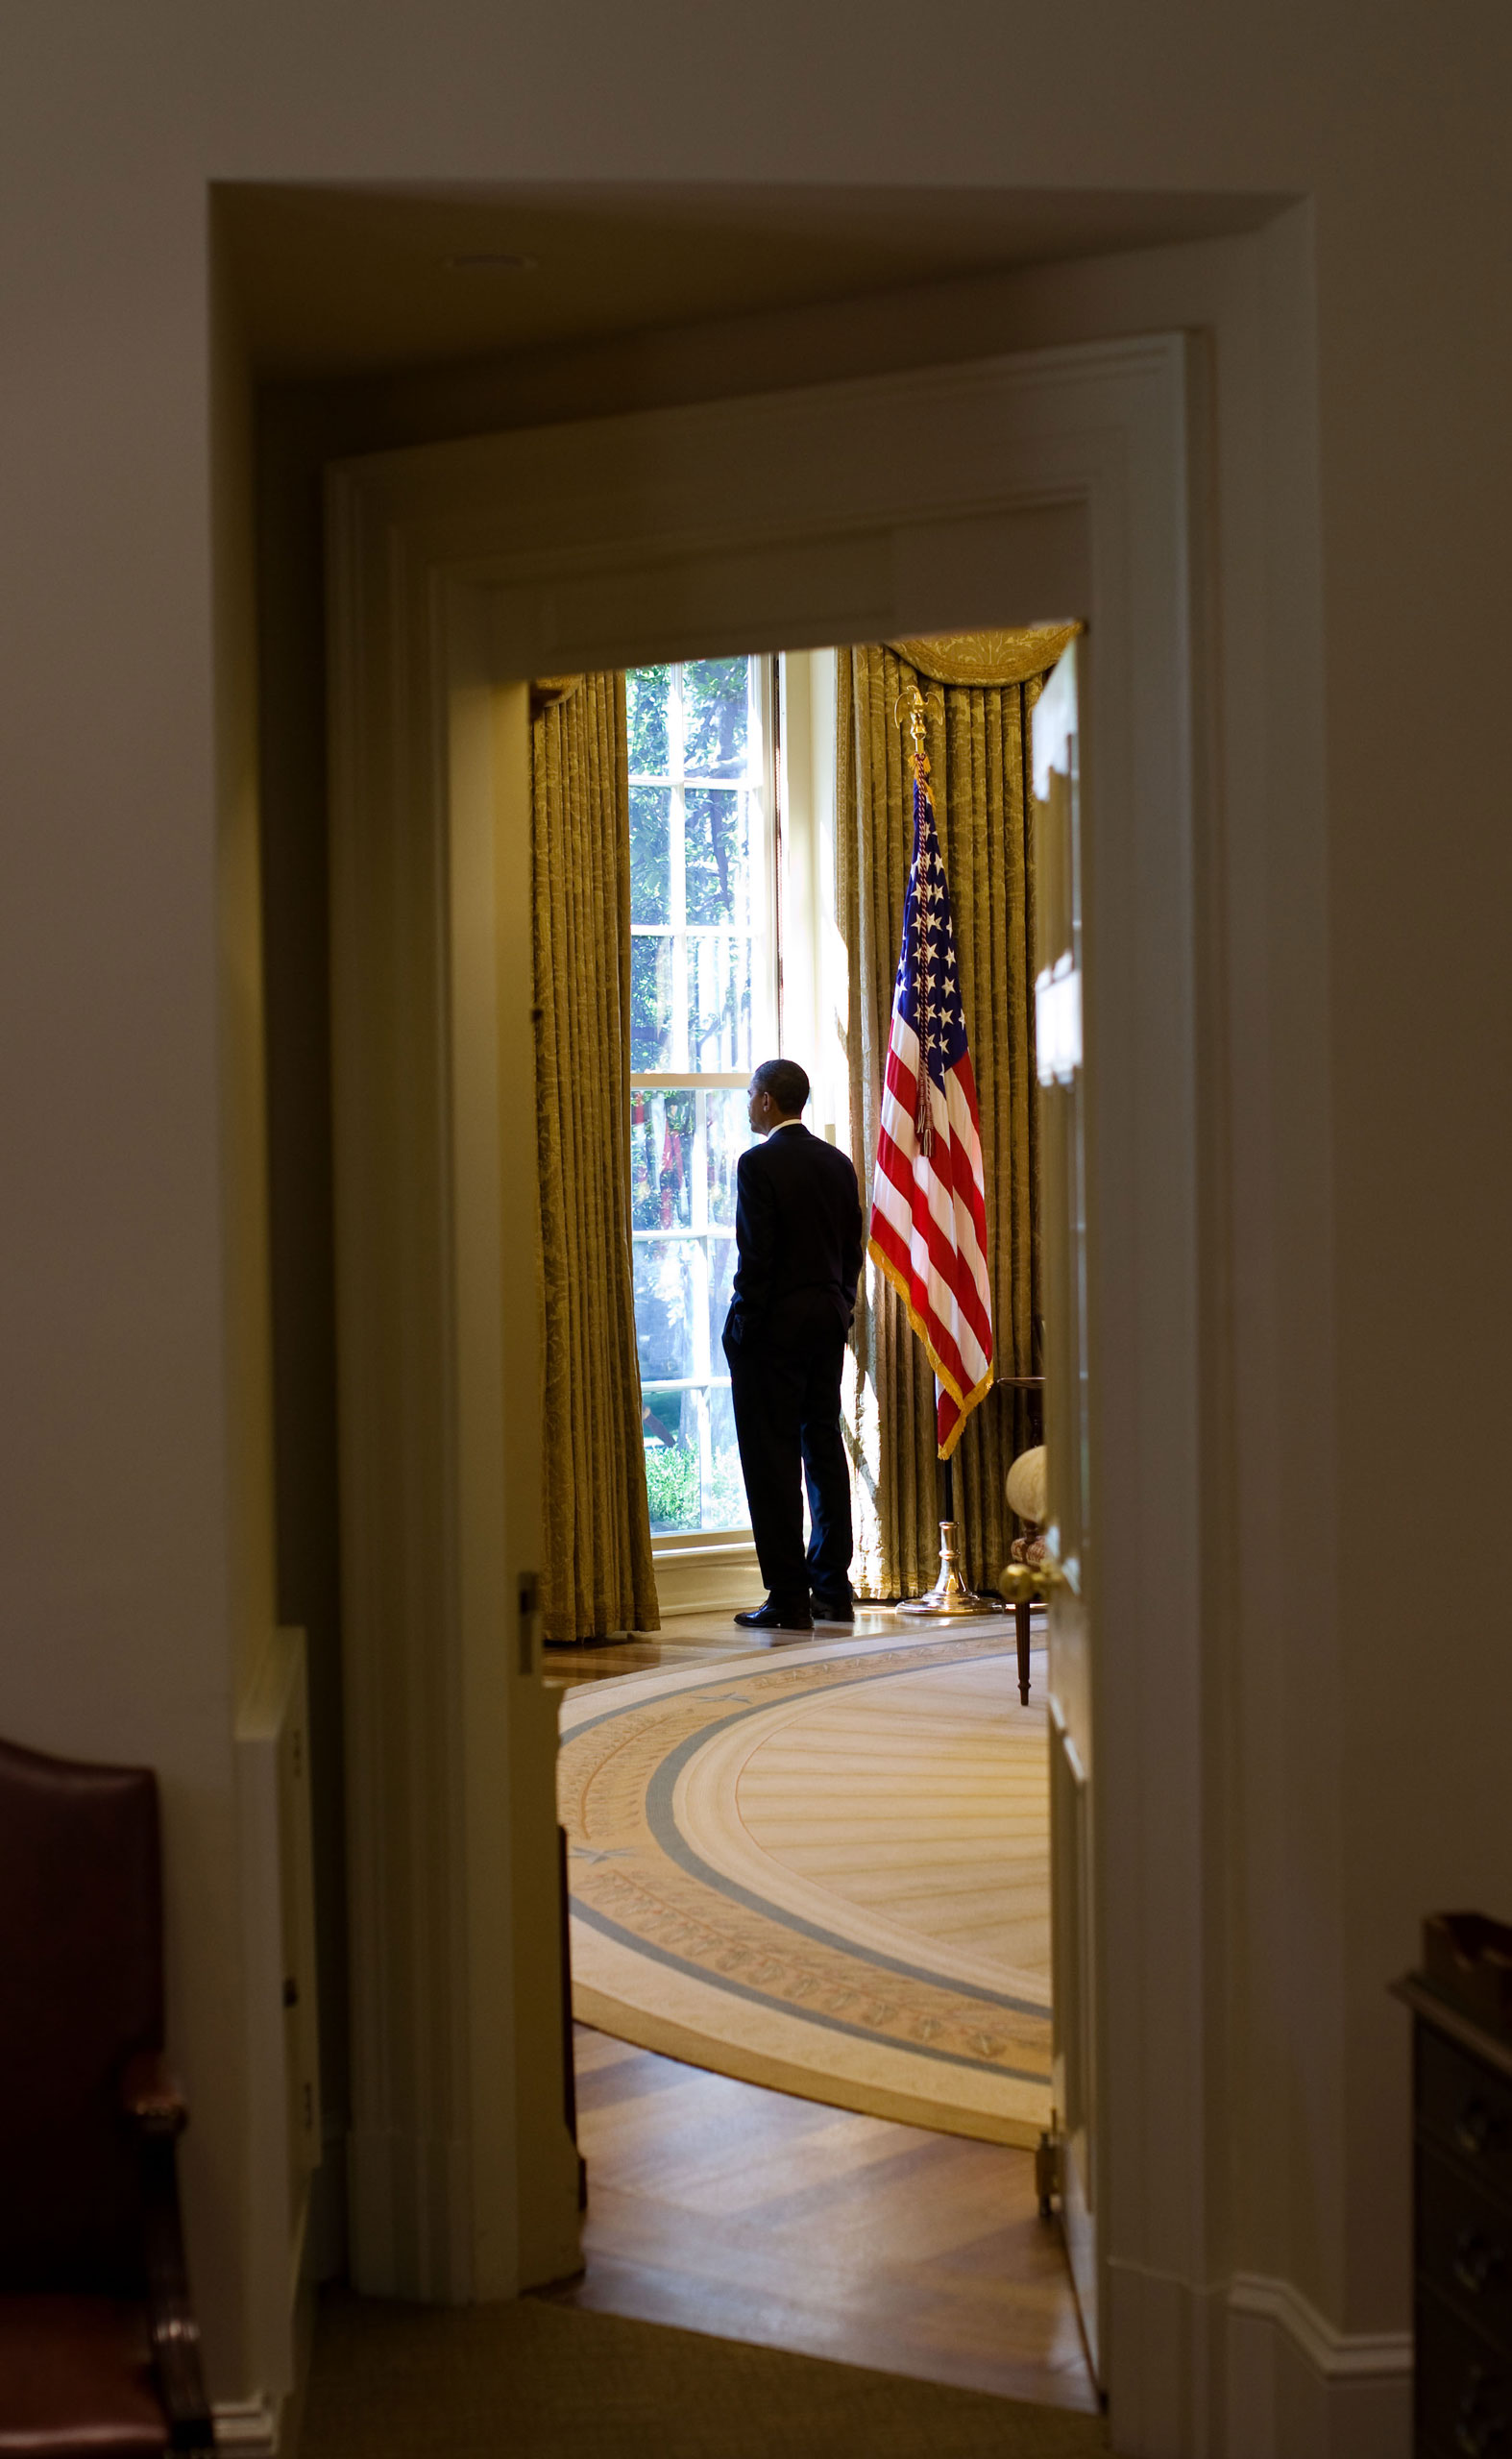 This was a difficult day for the President, shown here in the Oval Office on June 23, 2010, after he had made the decision to replace Gen. Stanley McChrystal with Gen. David Petraeus as the Commander of U.S. Forces in Afghanistan.